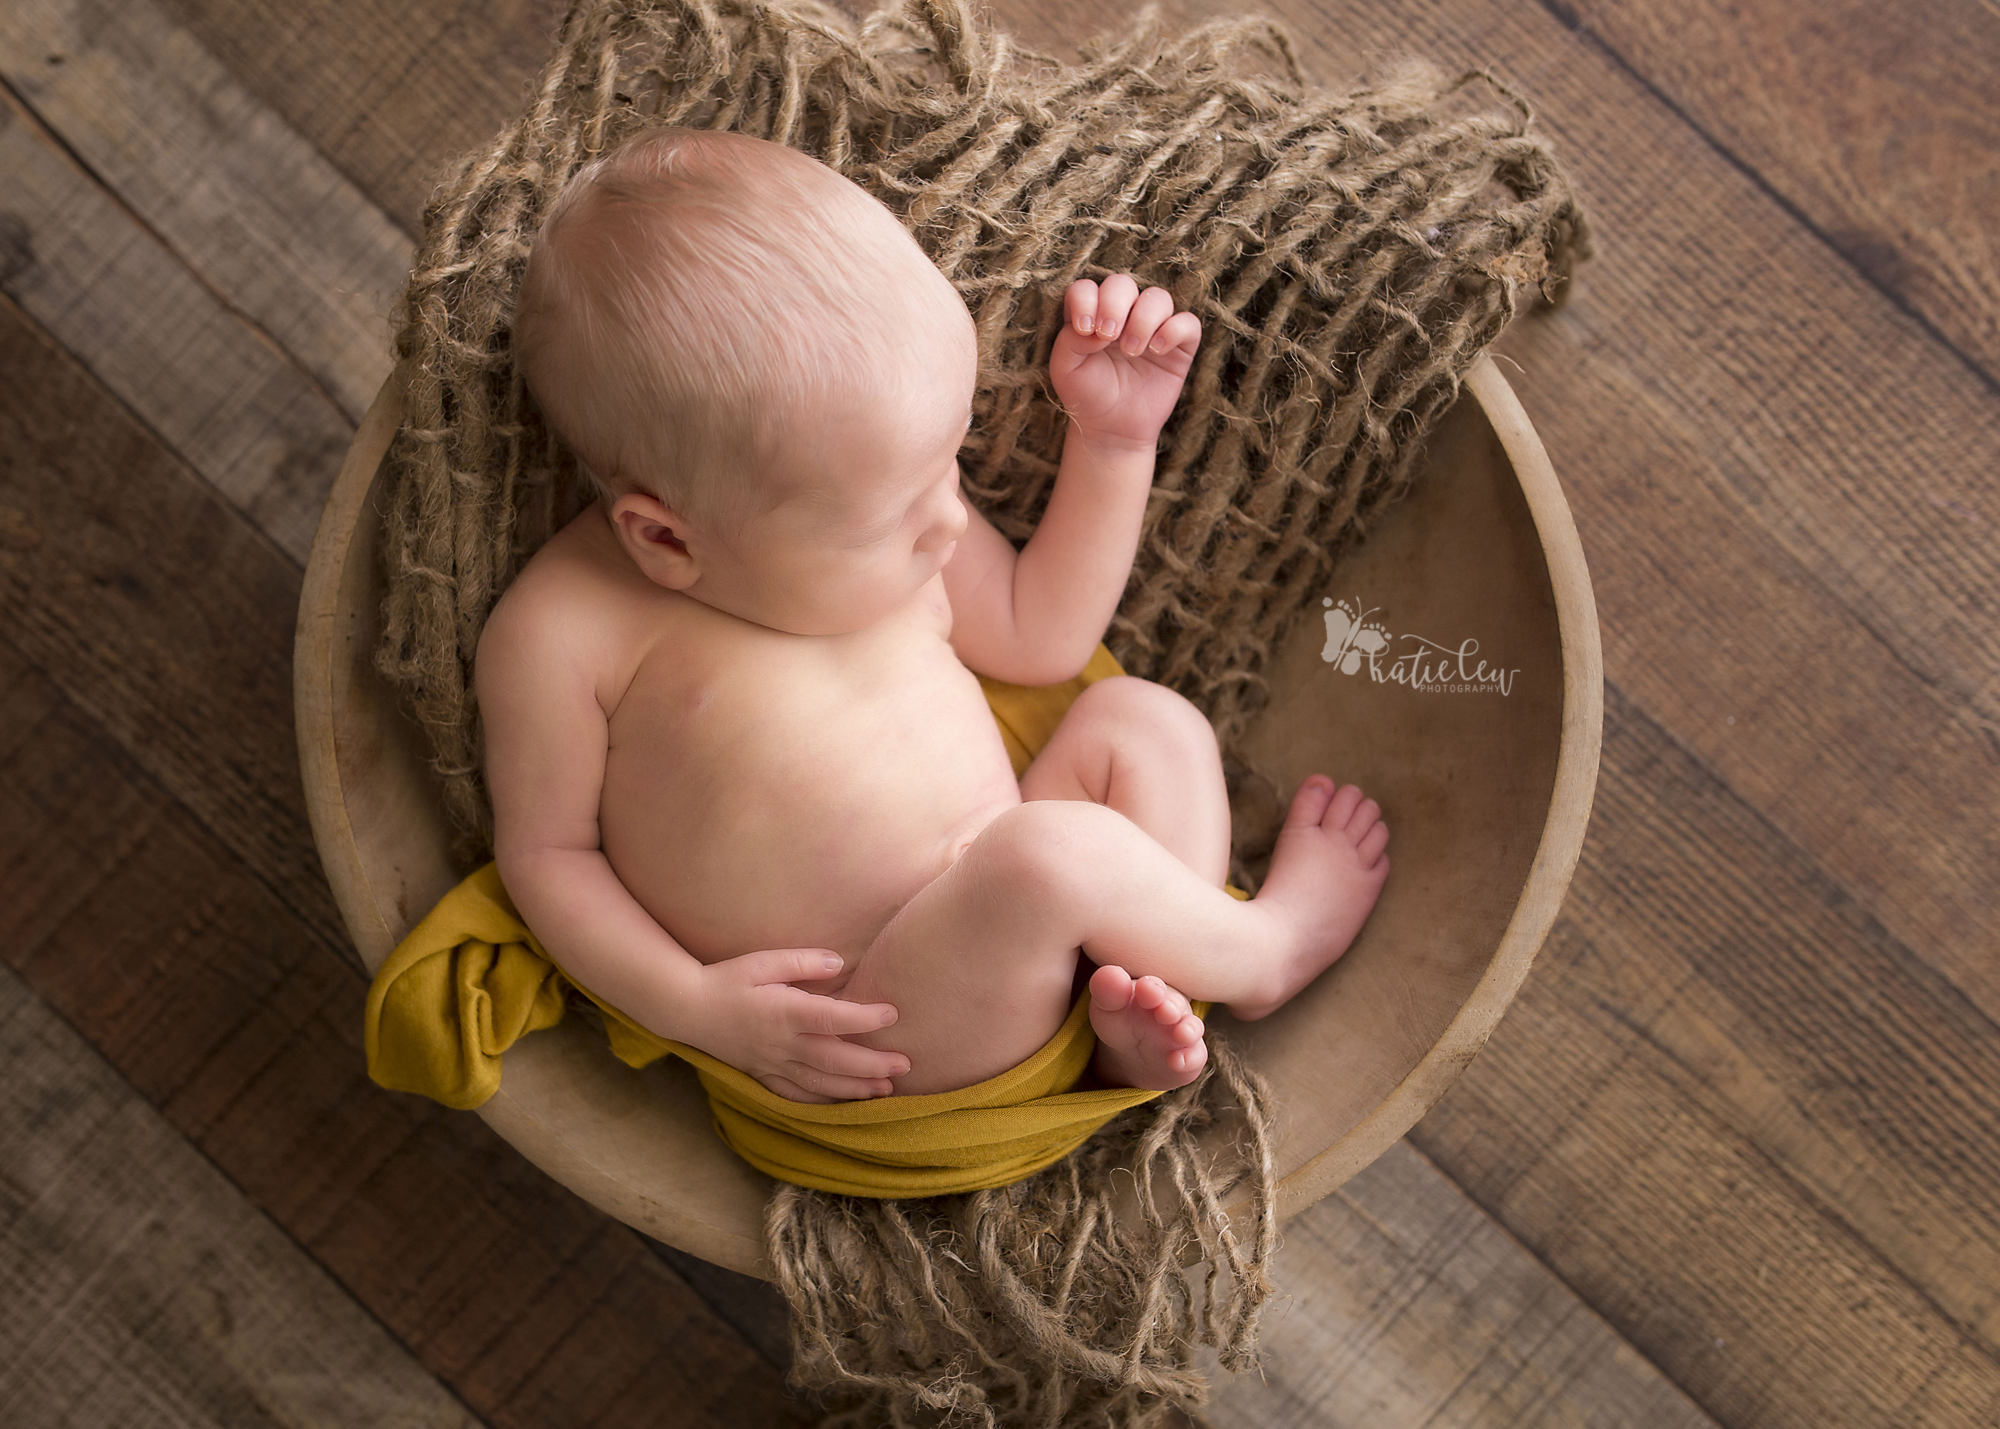 newborn baby boy sleeping and posed in a bowl